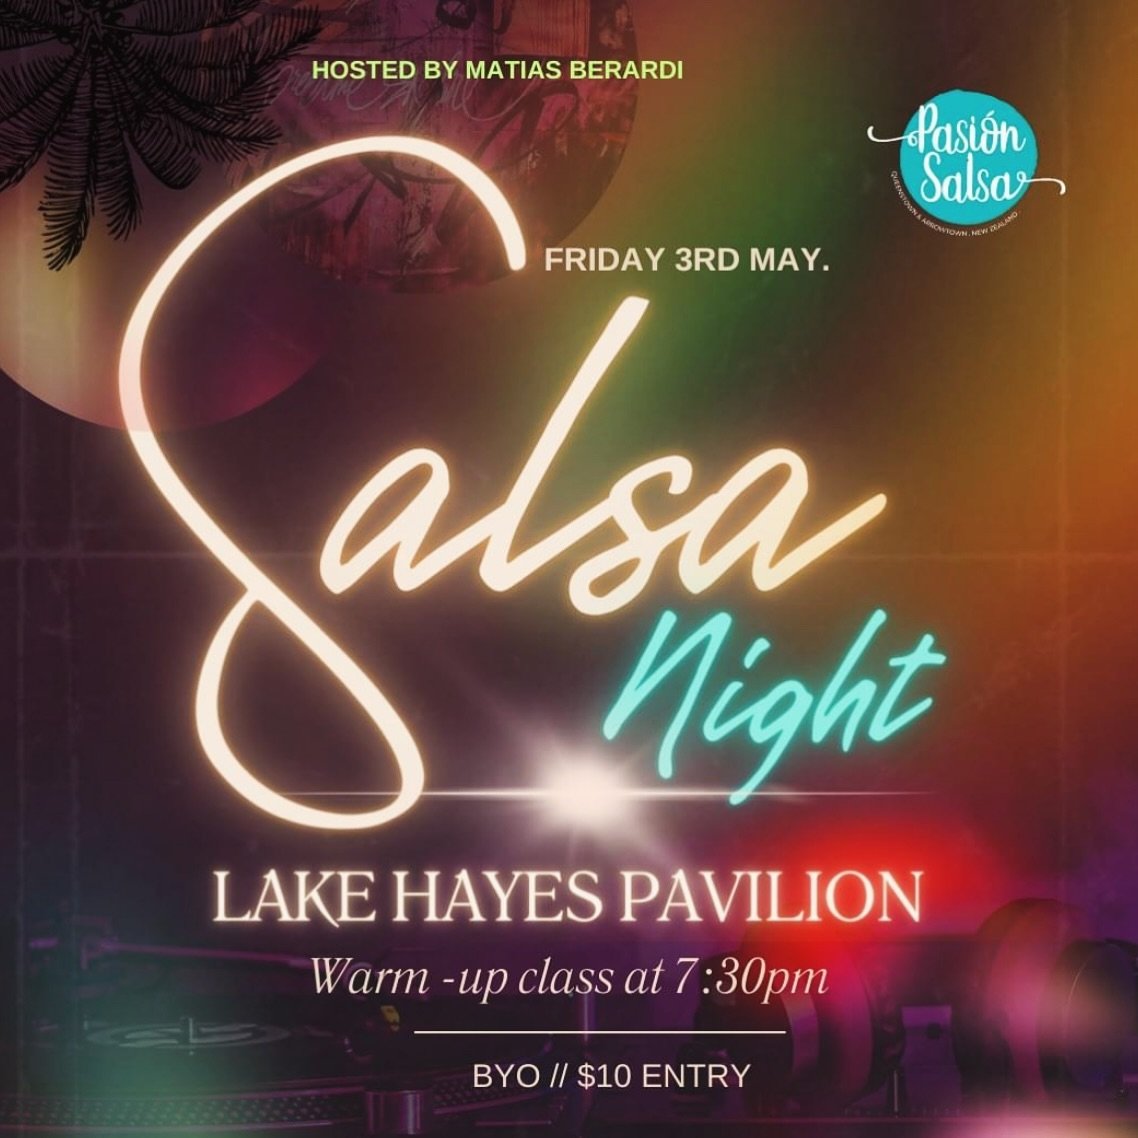 ✨ FRIDAY 5TH MAY✨

✨ LAKE HAYES PAVILION
✨ WARM UP CLASS FROM 7:30PM 
✨ BYO
✨ $10 ENTRY 
✨ Tunes by @matias.br9